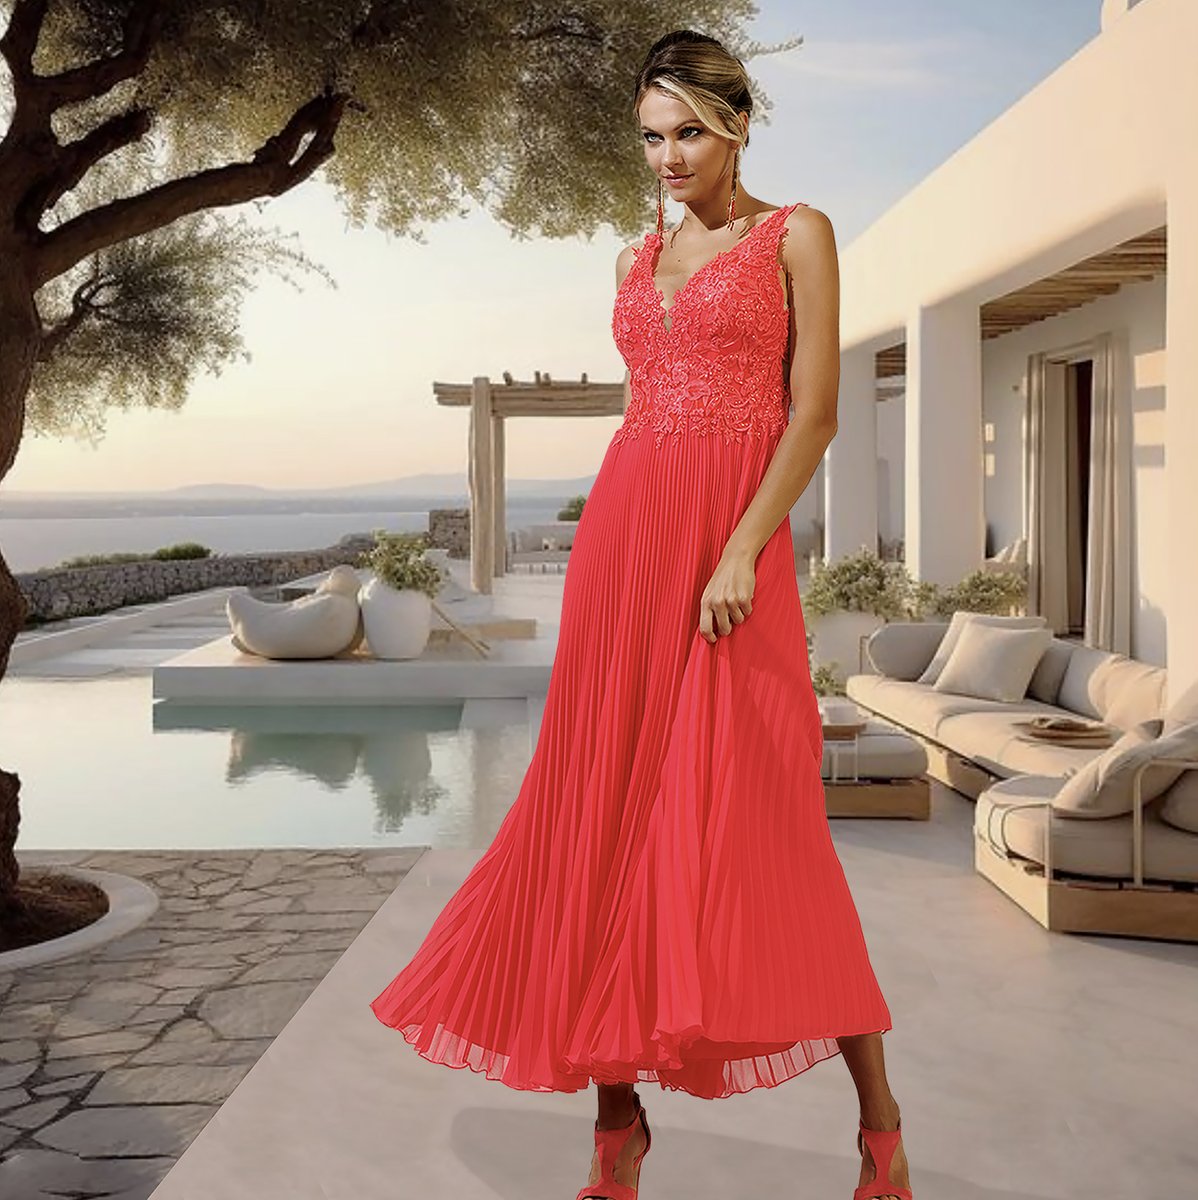 There is a shade of red for every woman

Stunning red long evening dress with a v-neck, lace bodice and a plissé skirt. 

#LineaRaffaelli #specialoccasionwear #weddingguest #plissékirt #occasionwear #cocktaildress #eveningdress #promdress #reddress #feestkleding #bruidsgasten